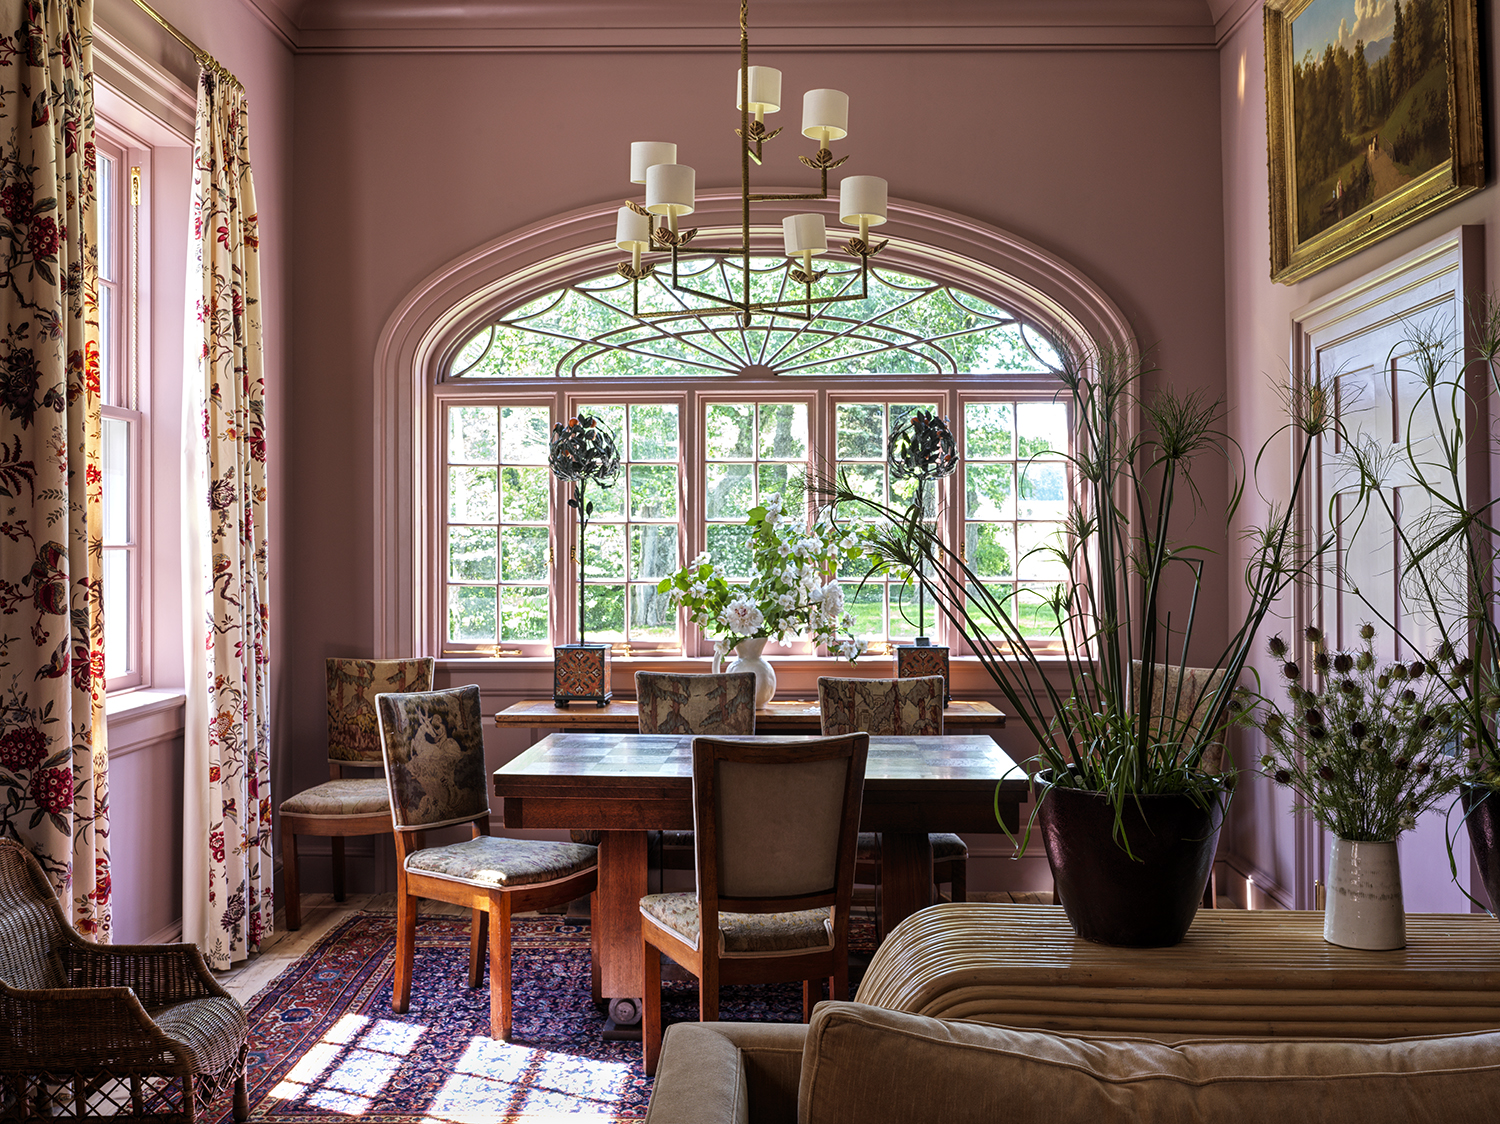 Parlor of an 18th-century farmhouse restored and designed by Hendricks Churchill with pink walls and vintage dining table and chairs